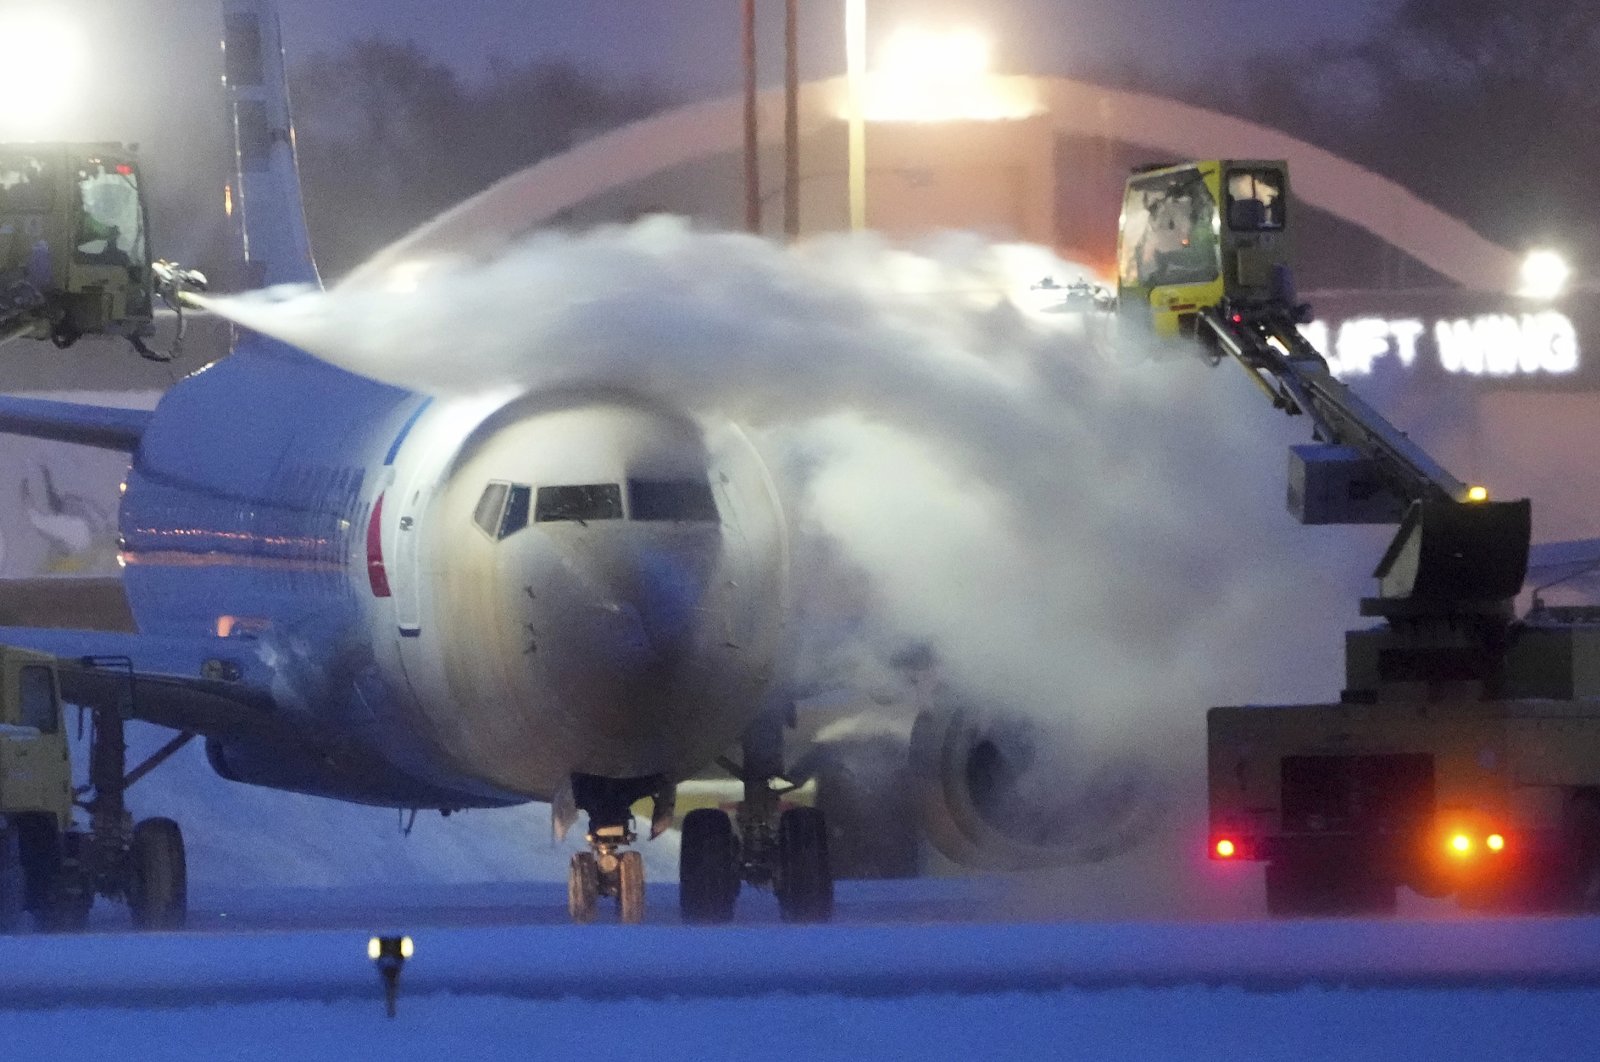 An American Airlines plane is de-iced as high winds whip around 7.5 inches of new snow at Minneapolis-St. Paul International Airport, U.S., Dec. 22, 2022. (AP Photo)